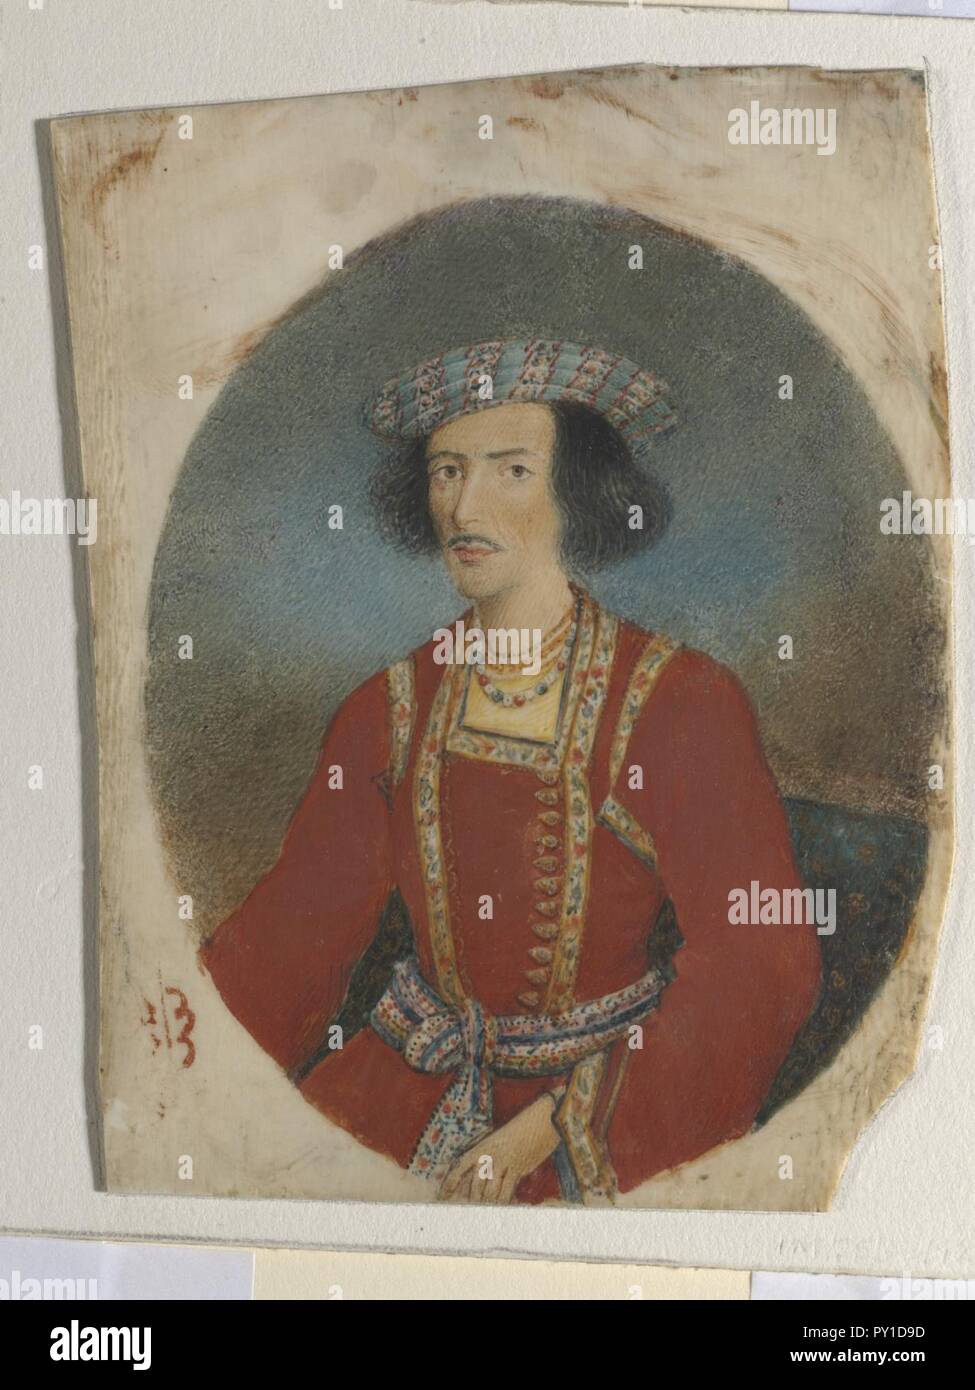 Bust portrait of the Hindu reformer Ram Mohan Roy.. Stock Photo